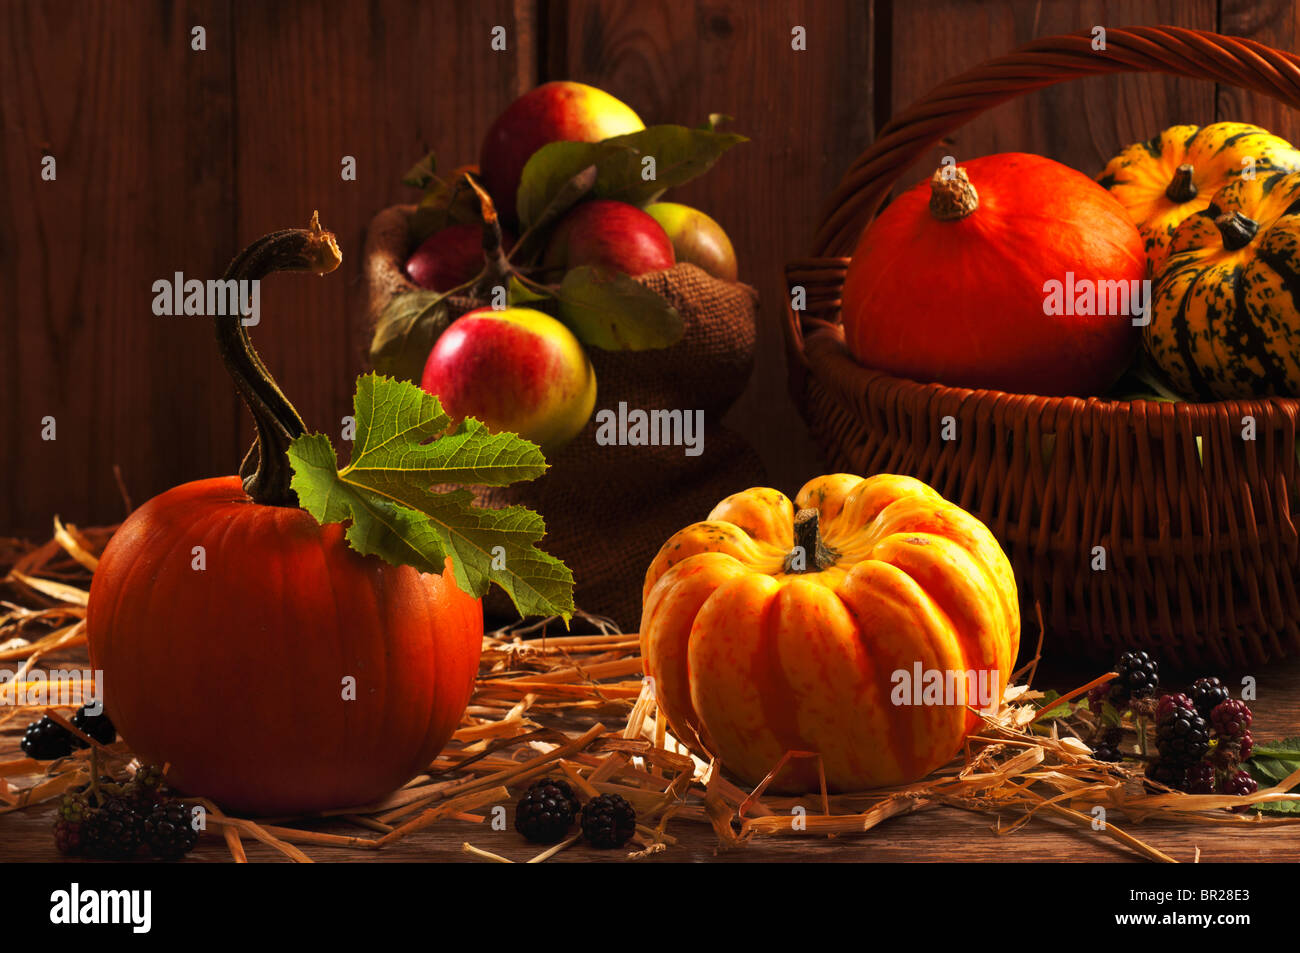 Harvest setting with pumpkins, gourds, orchard apples and blackberry fruits Stock Photo